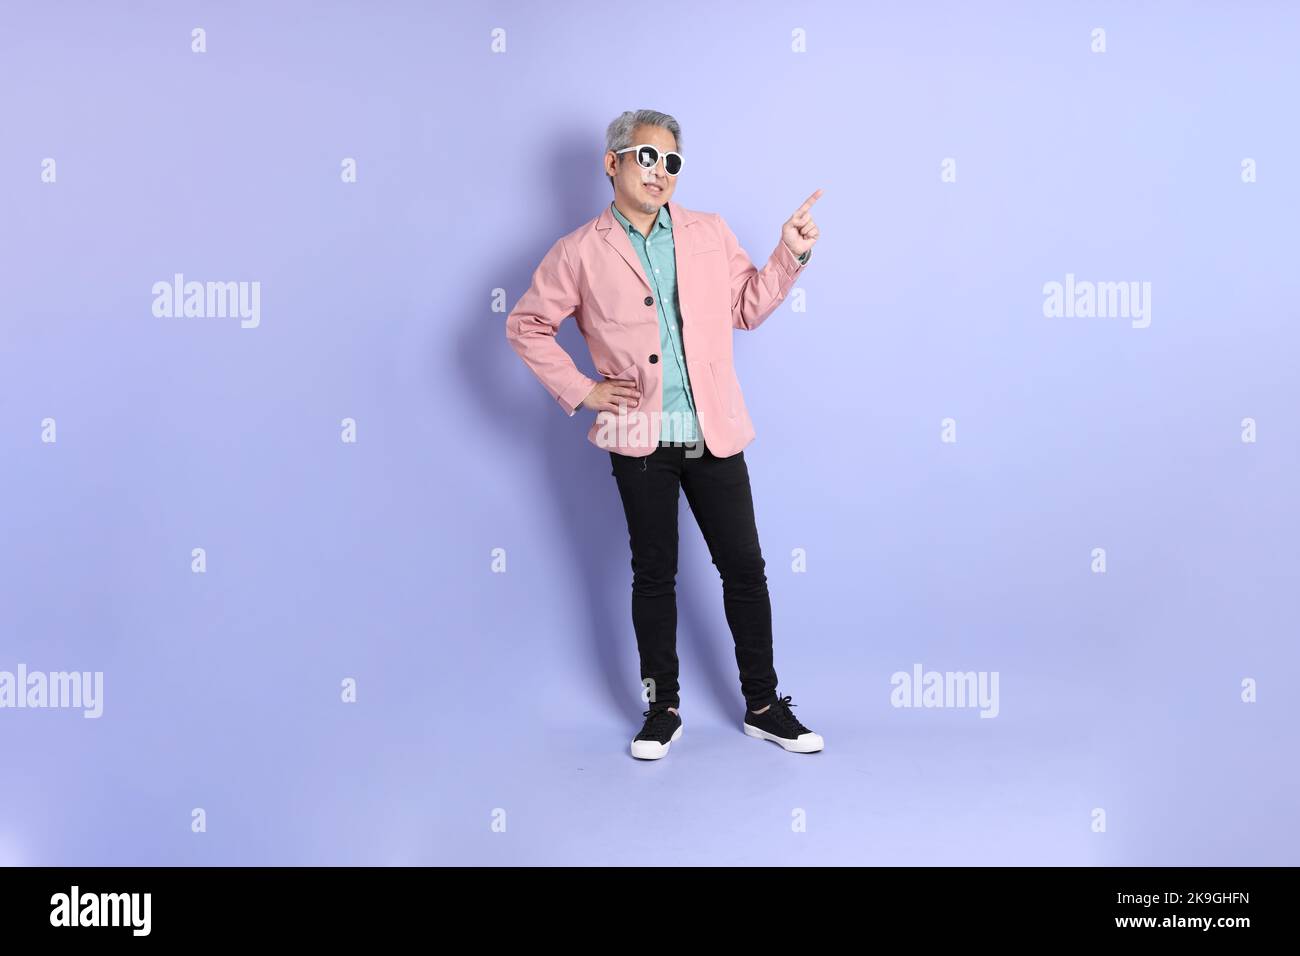 The 40s adult Asian man stnading on the purple background with smart casual clothes. Stock Photo